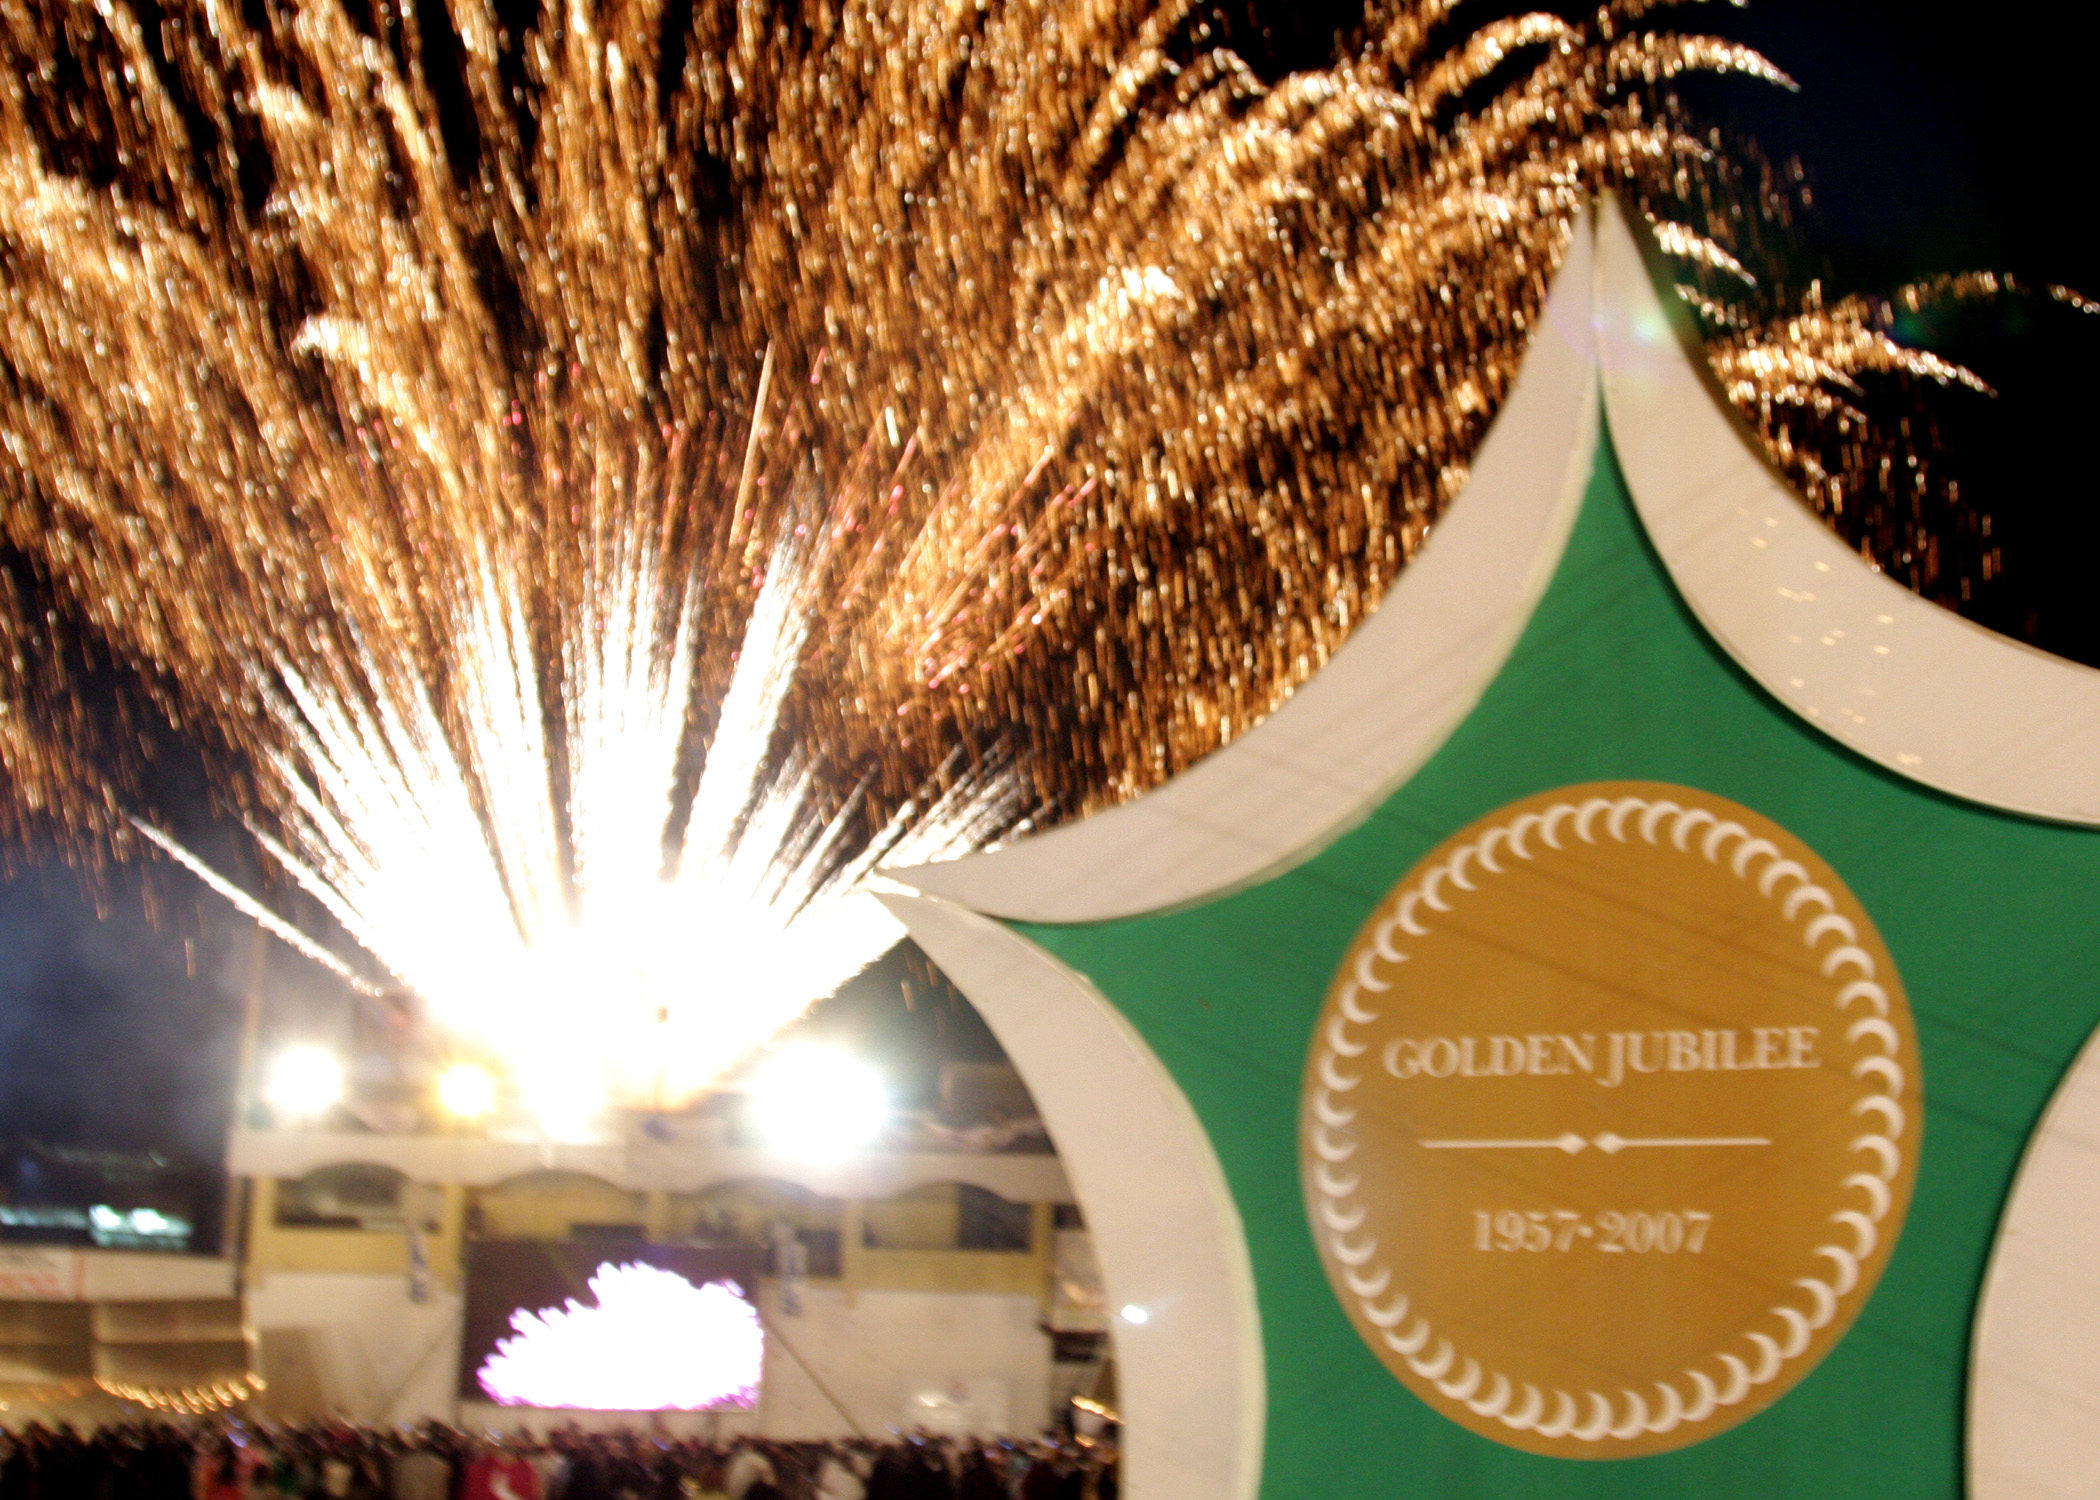 The Golden Jubilee Games closed with an impressive display of fireworks. Photo: Akber Dewji (Hakim Sons)